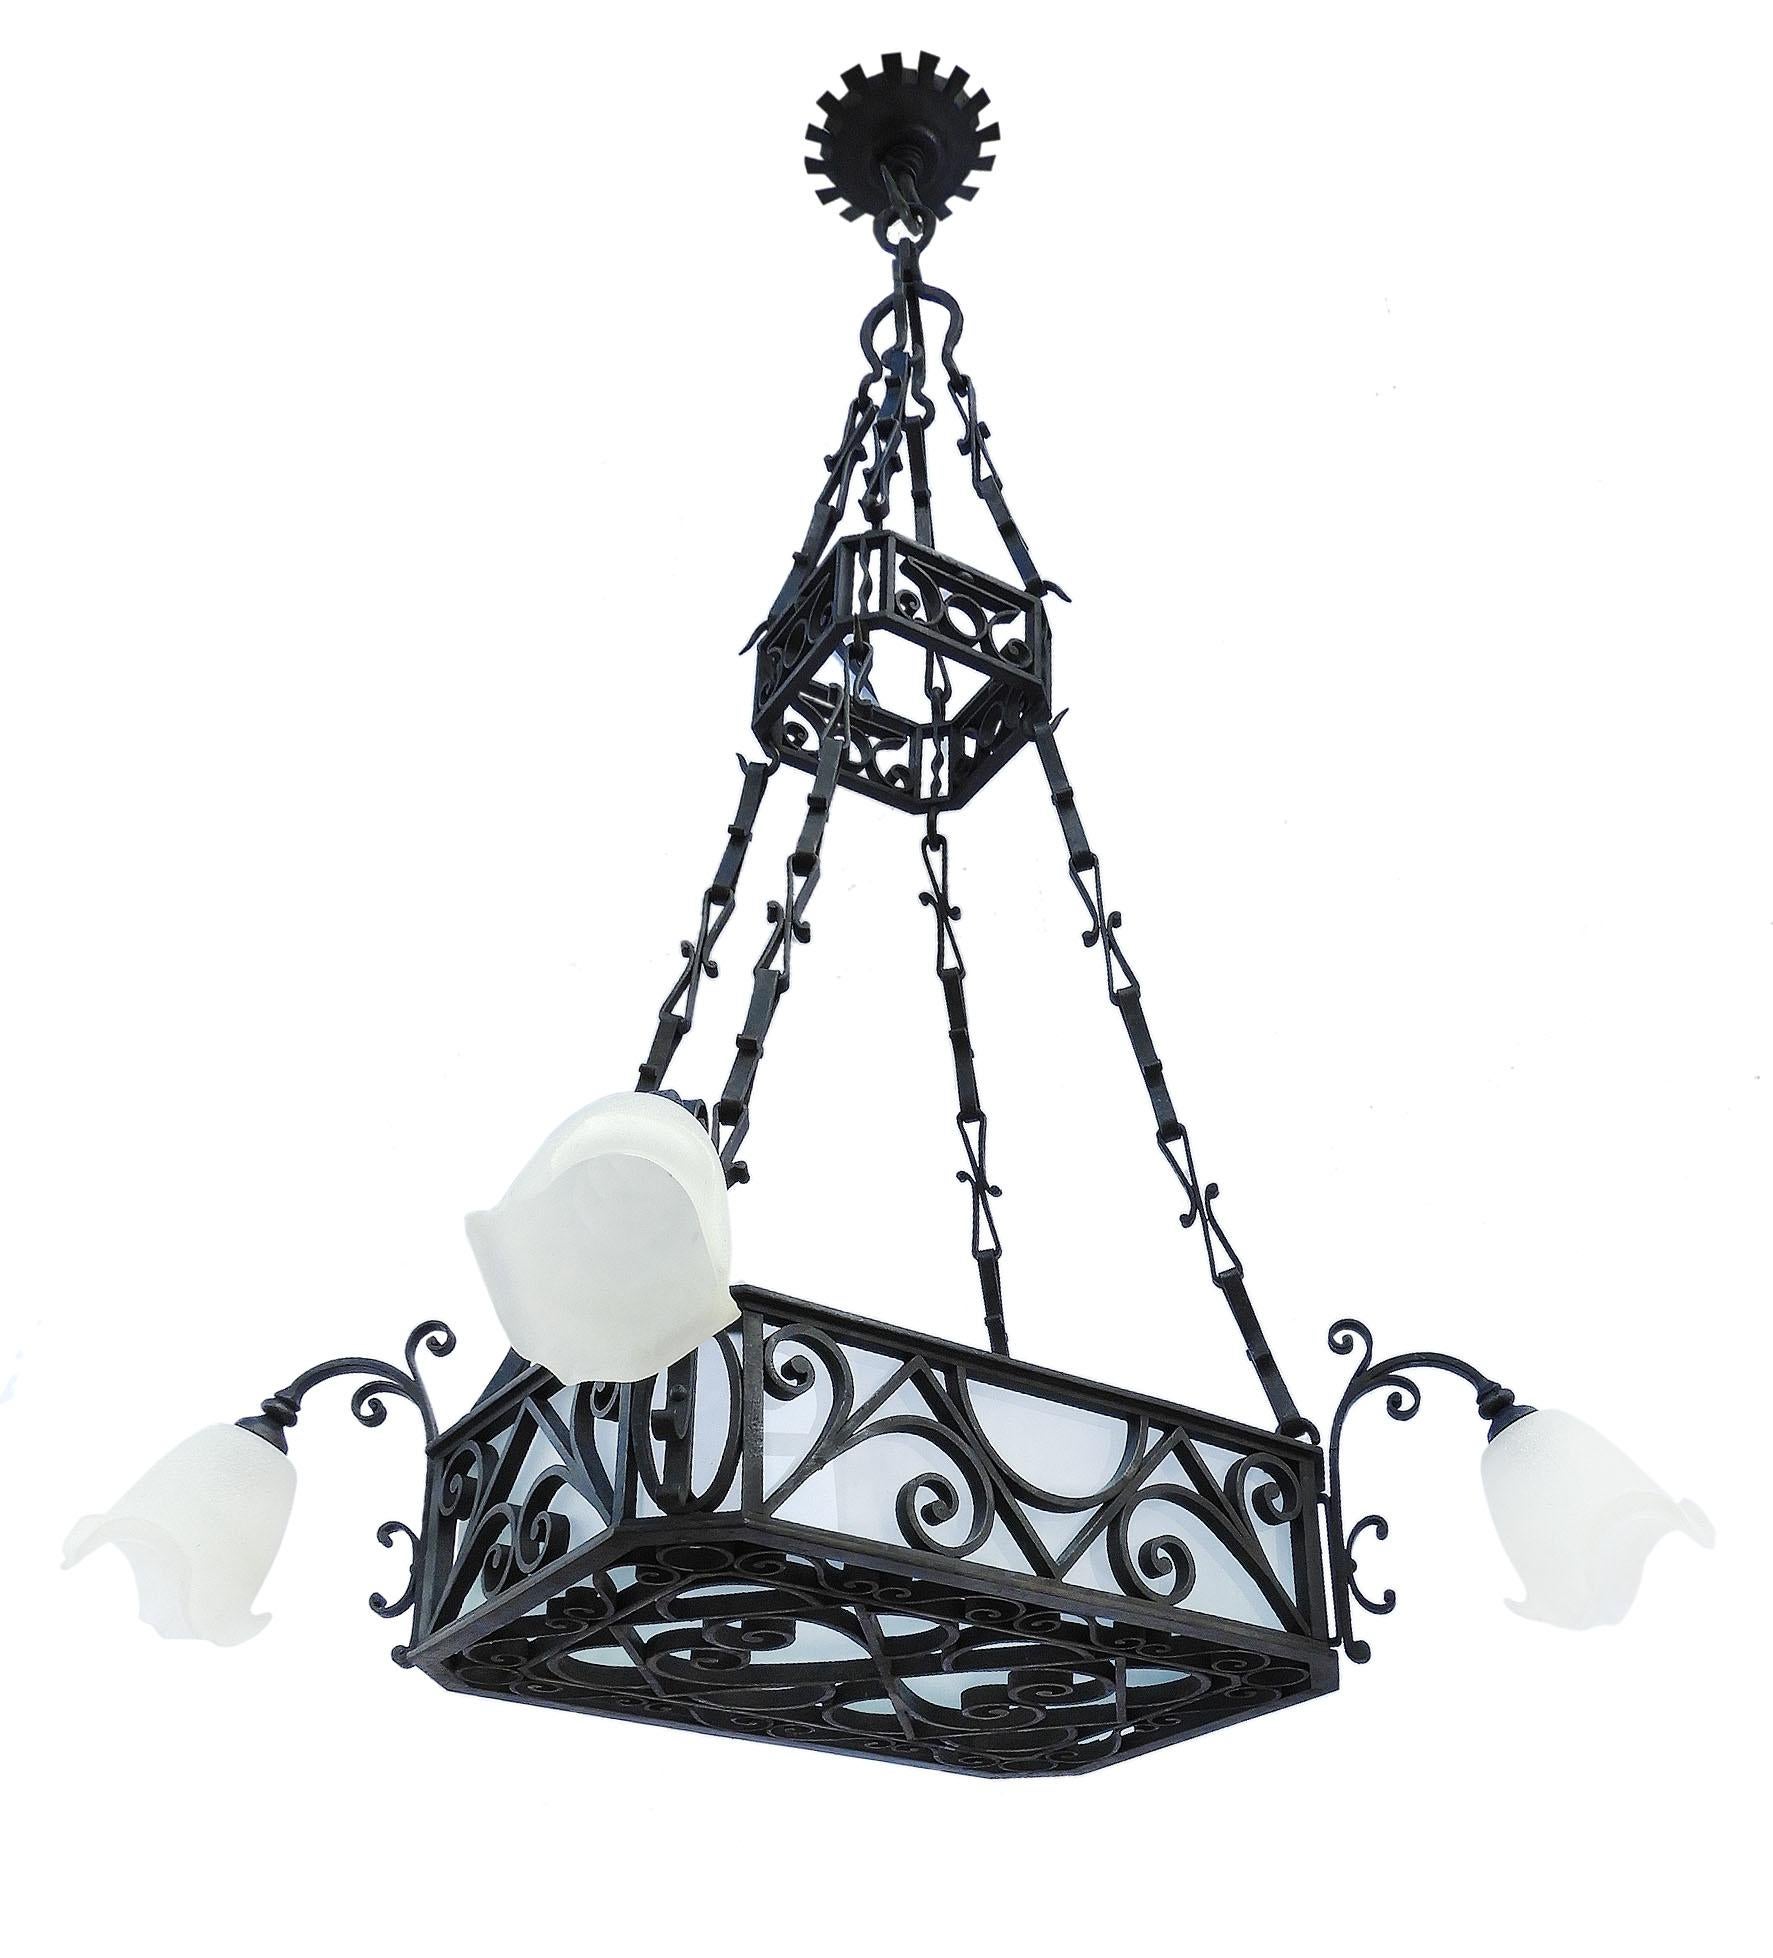 Large French wrought iron and frosted glass chandelier, circa 1900. A stunning and rare find from a restaurant in Biarritz, France, popular during the Belle Époque era. Heavy Artisan made chandelier with a central basket lined with frosted glass and